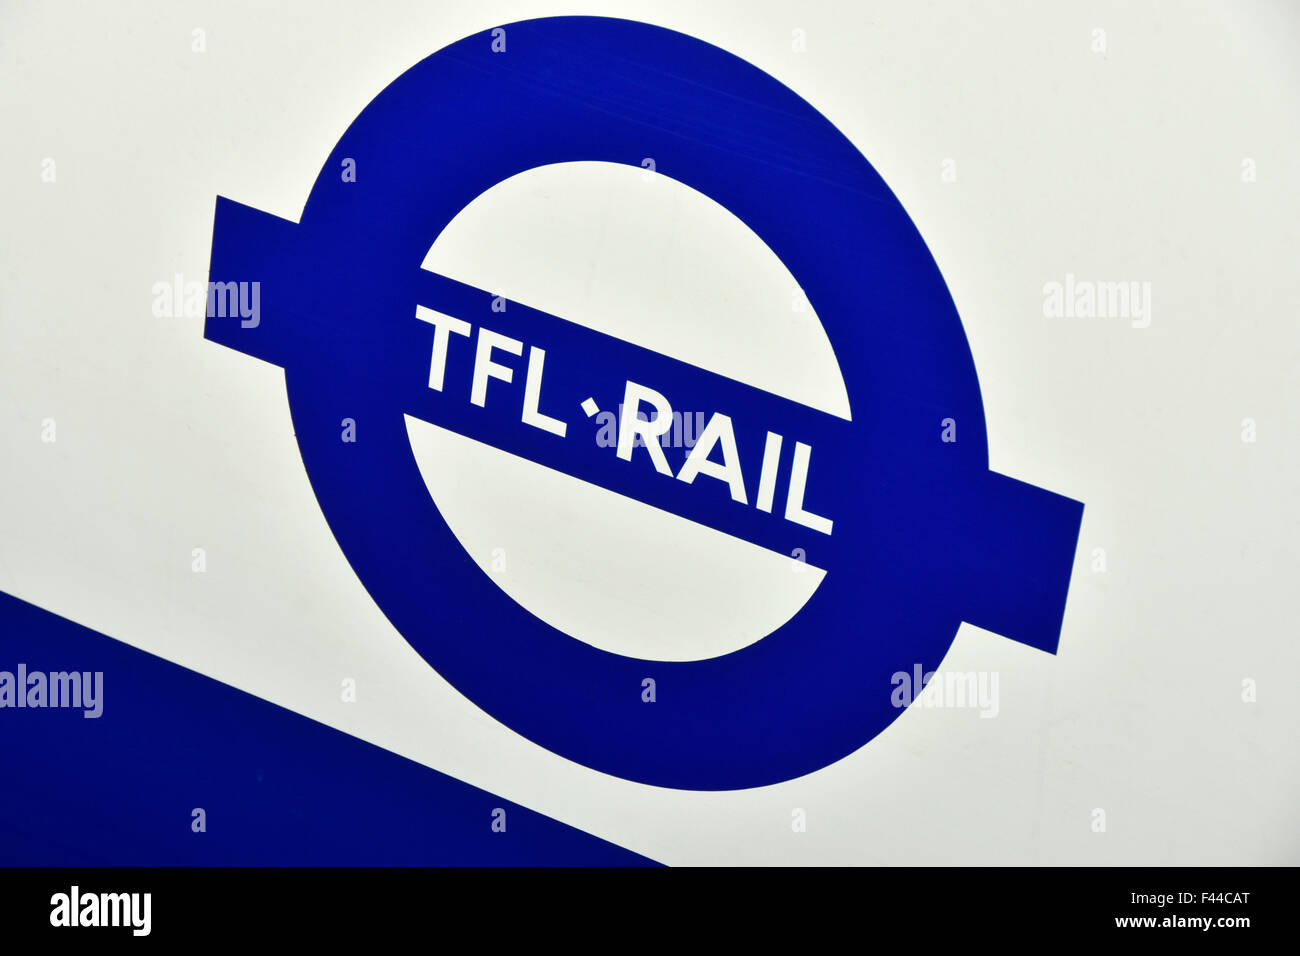 Transport for London logo on metro commuter train carriage taken over by tfl on Shenfield to London Liverpool Street for Crossrail Elizabeth line uk Stock Photo